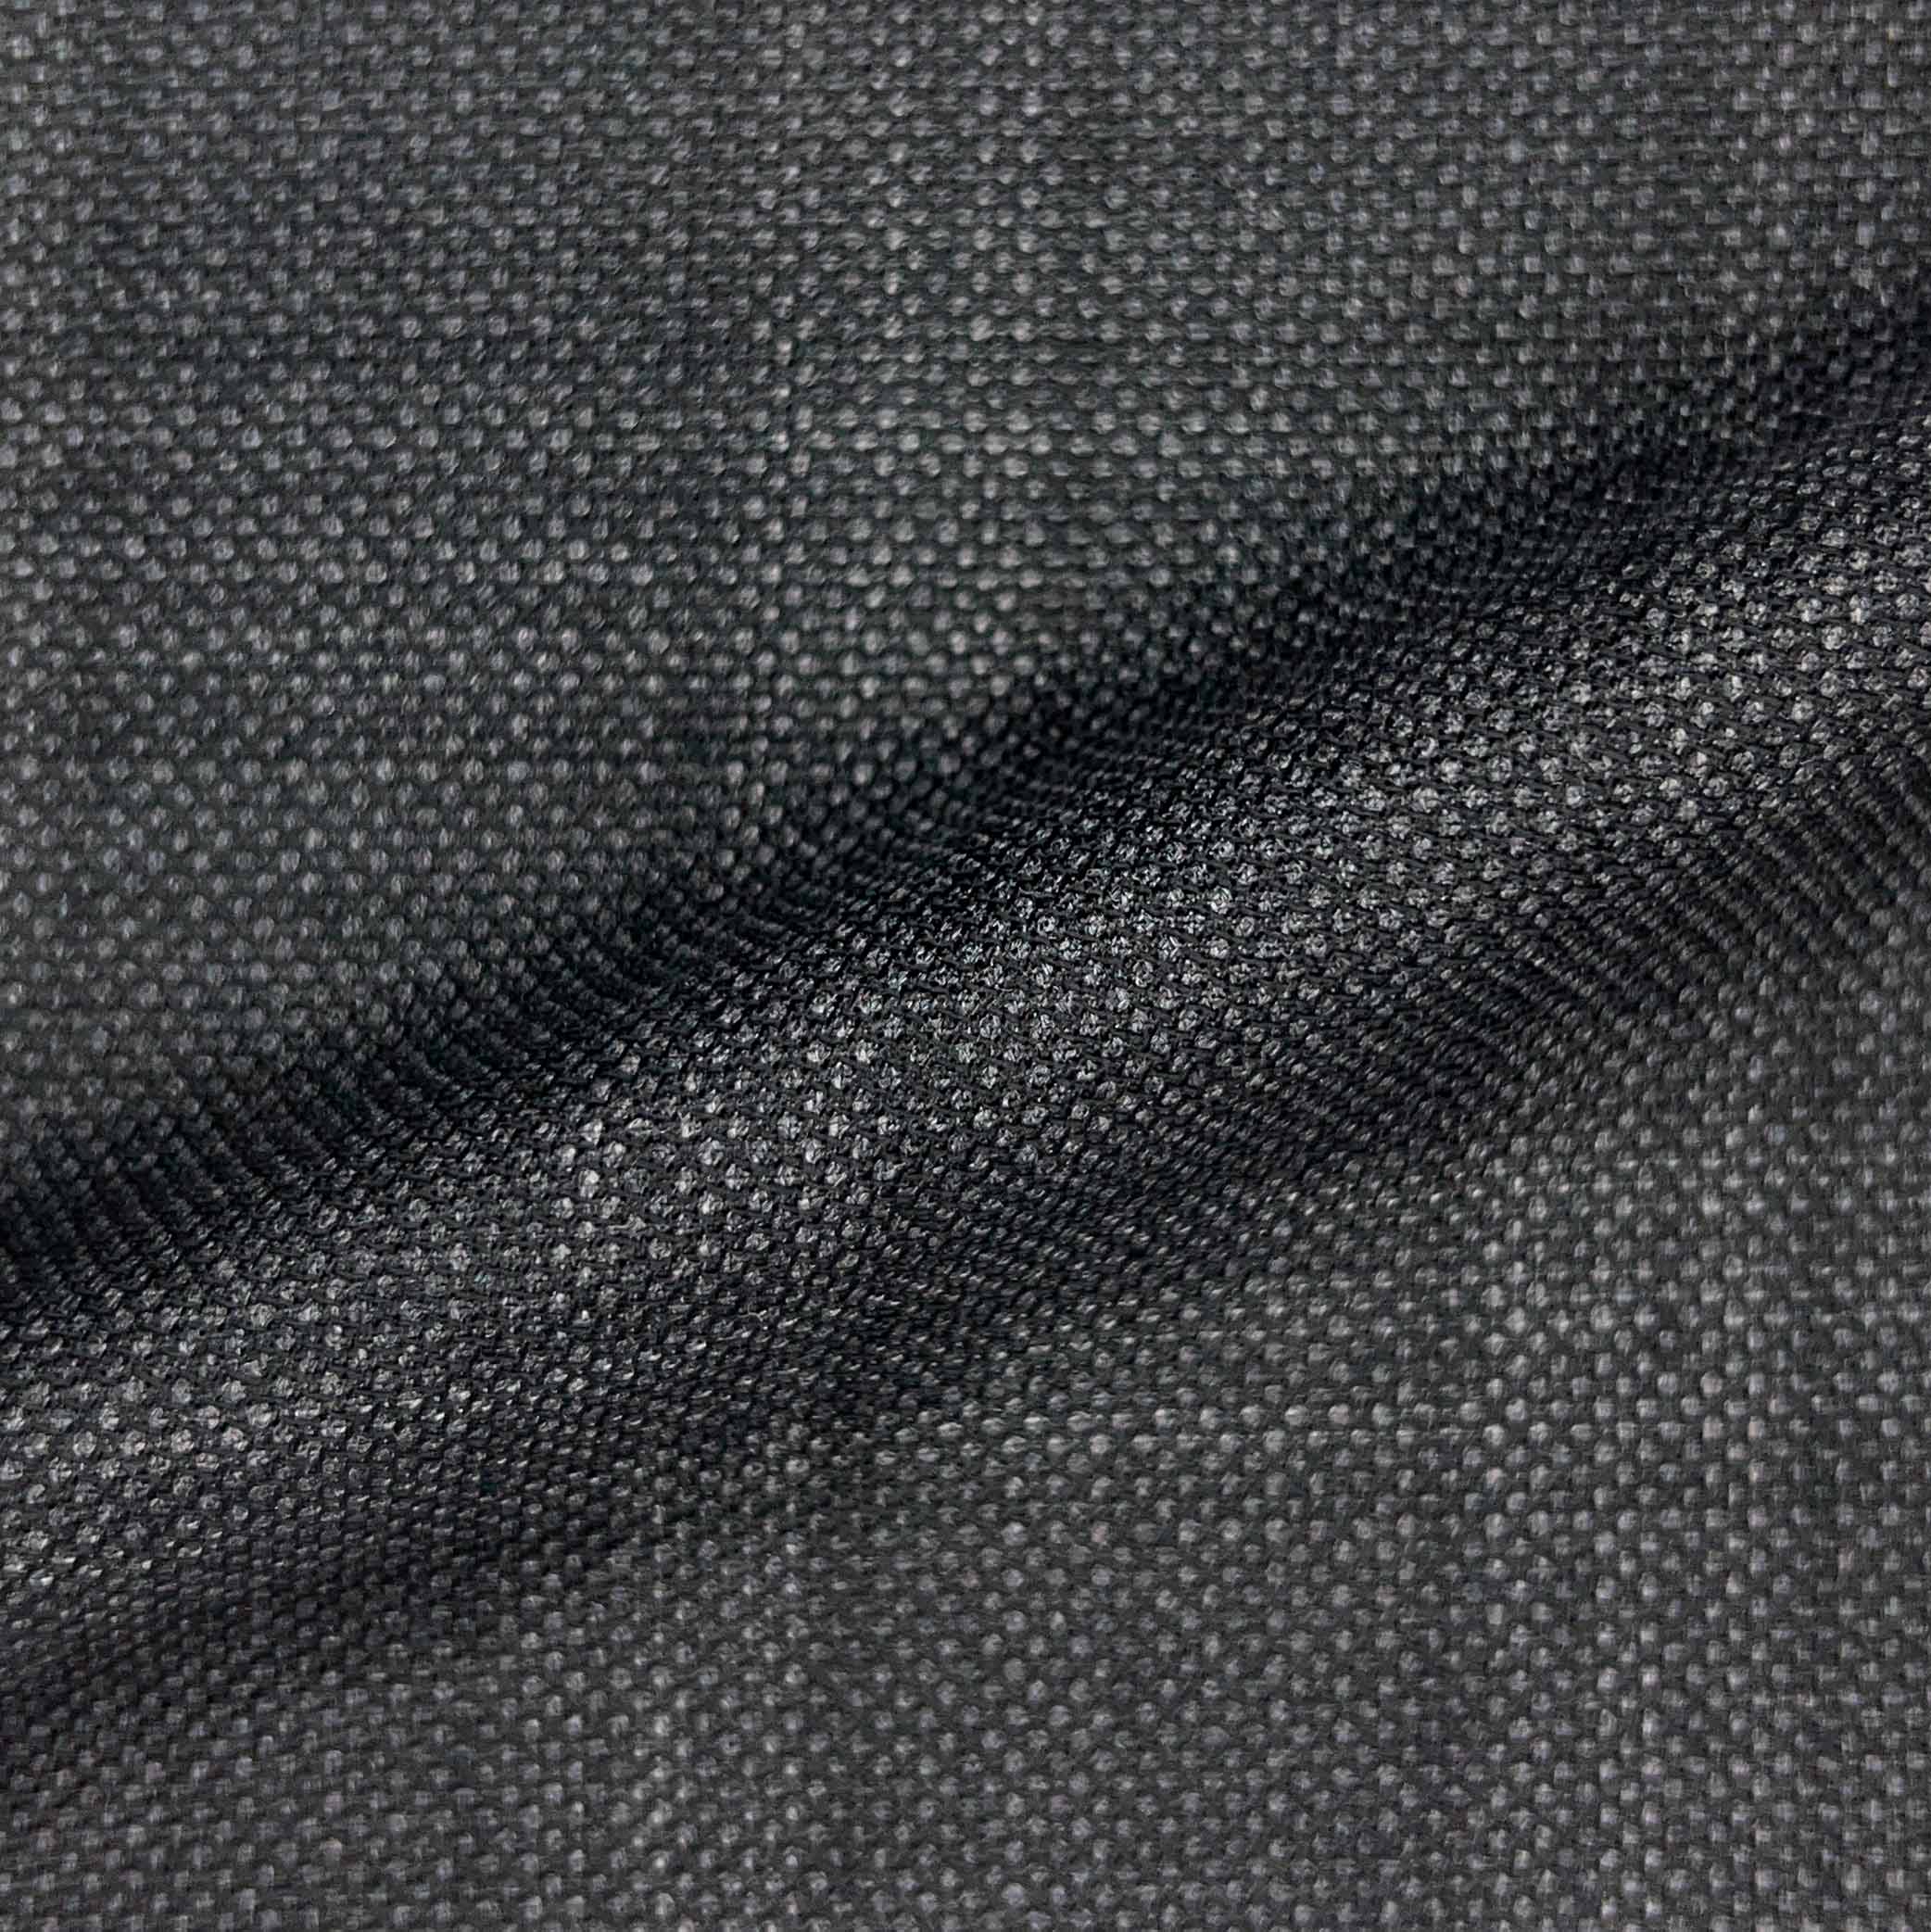 Westwood Hart Online Custom Hand Tailor Suits Sportcoats Trousers Waistcoats Overcoats Made To Measure Formalwear Tuxedo Charcoal Grey Fine Watch Plaid With Comfort Stretch